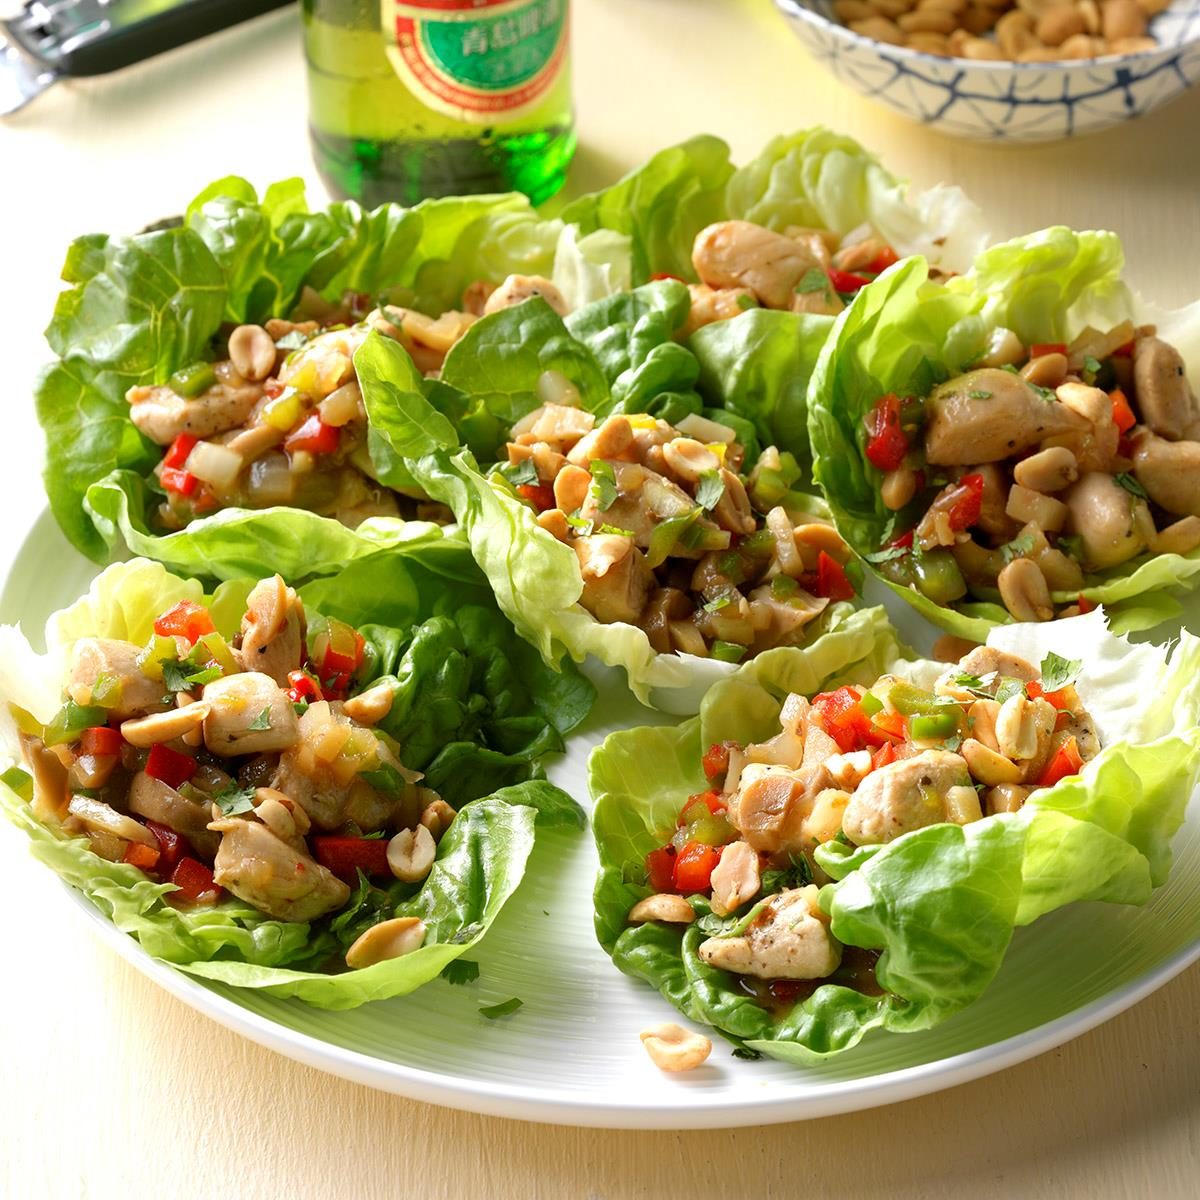 Inspired by Chicken Lettuce Wraps